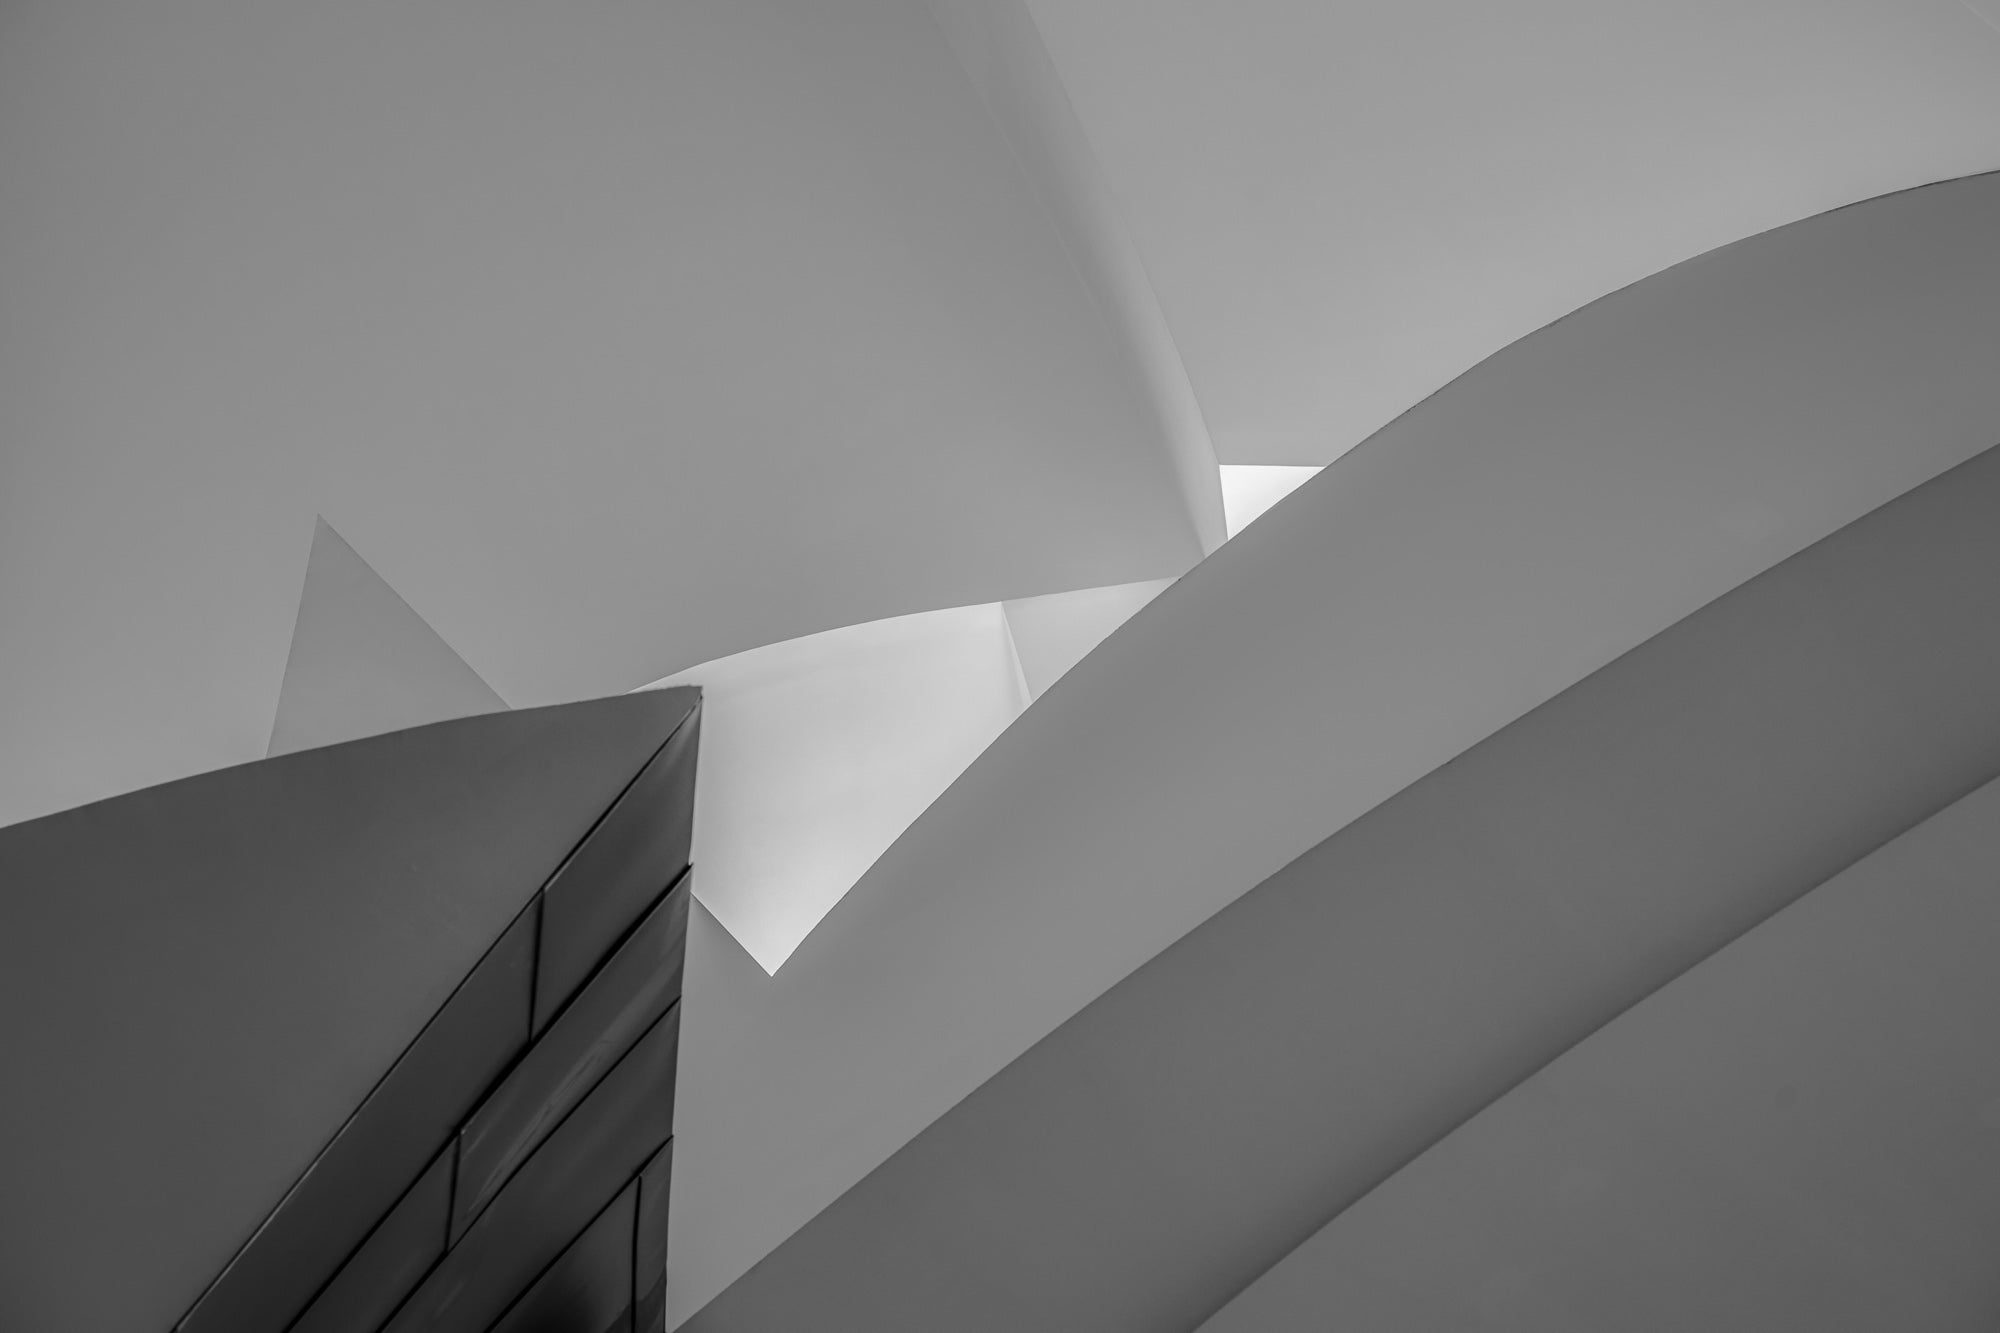 "Black and white photograph showcasing the abstract geometric forms of the Guggenheim Museum in Bilbao."